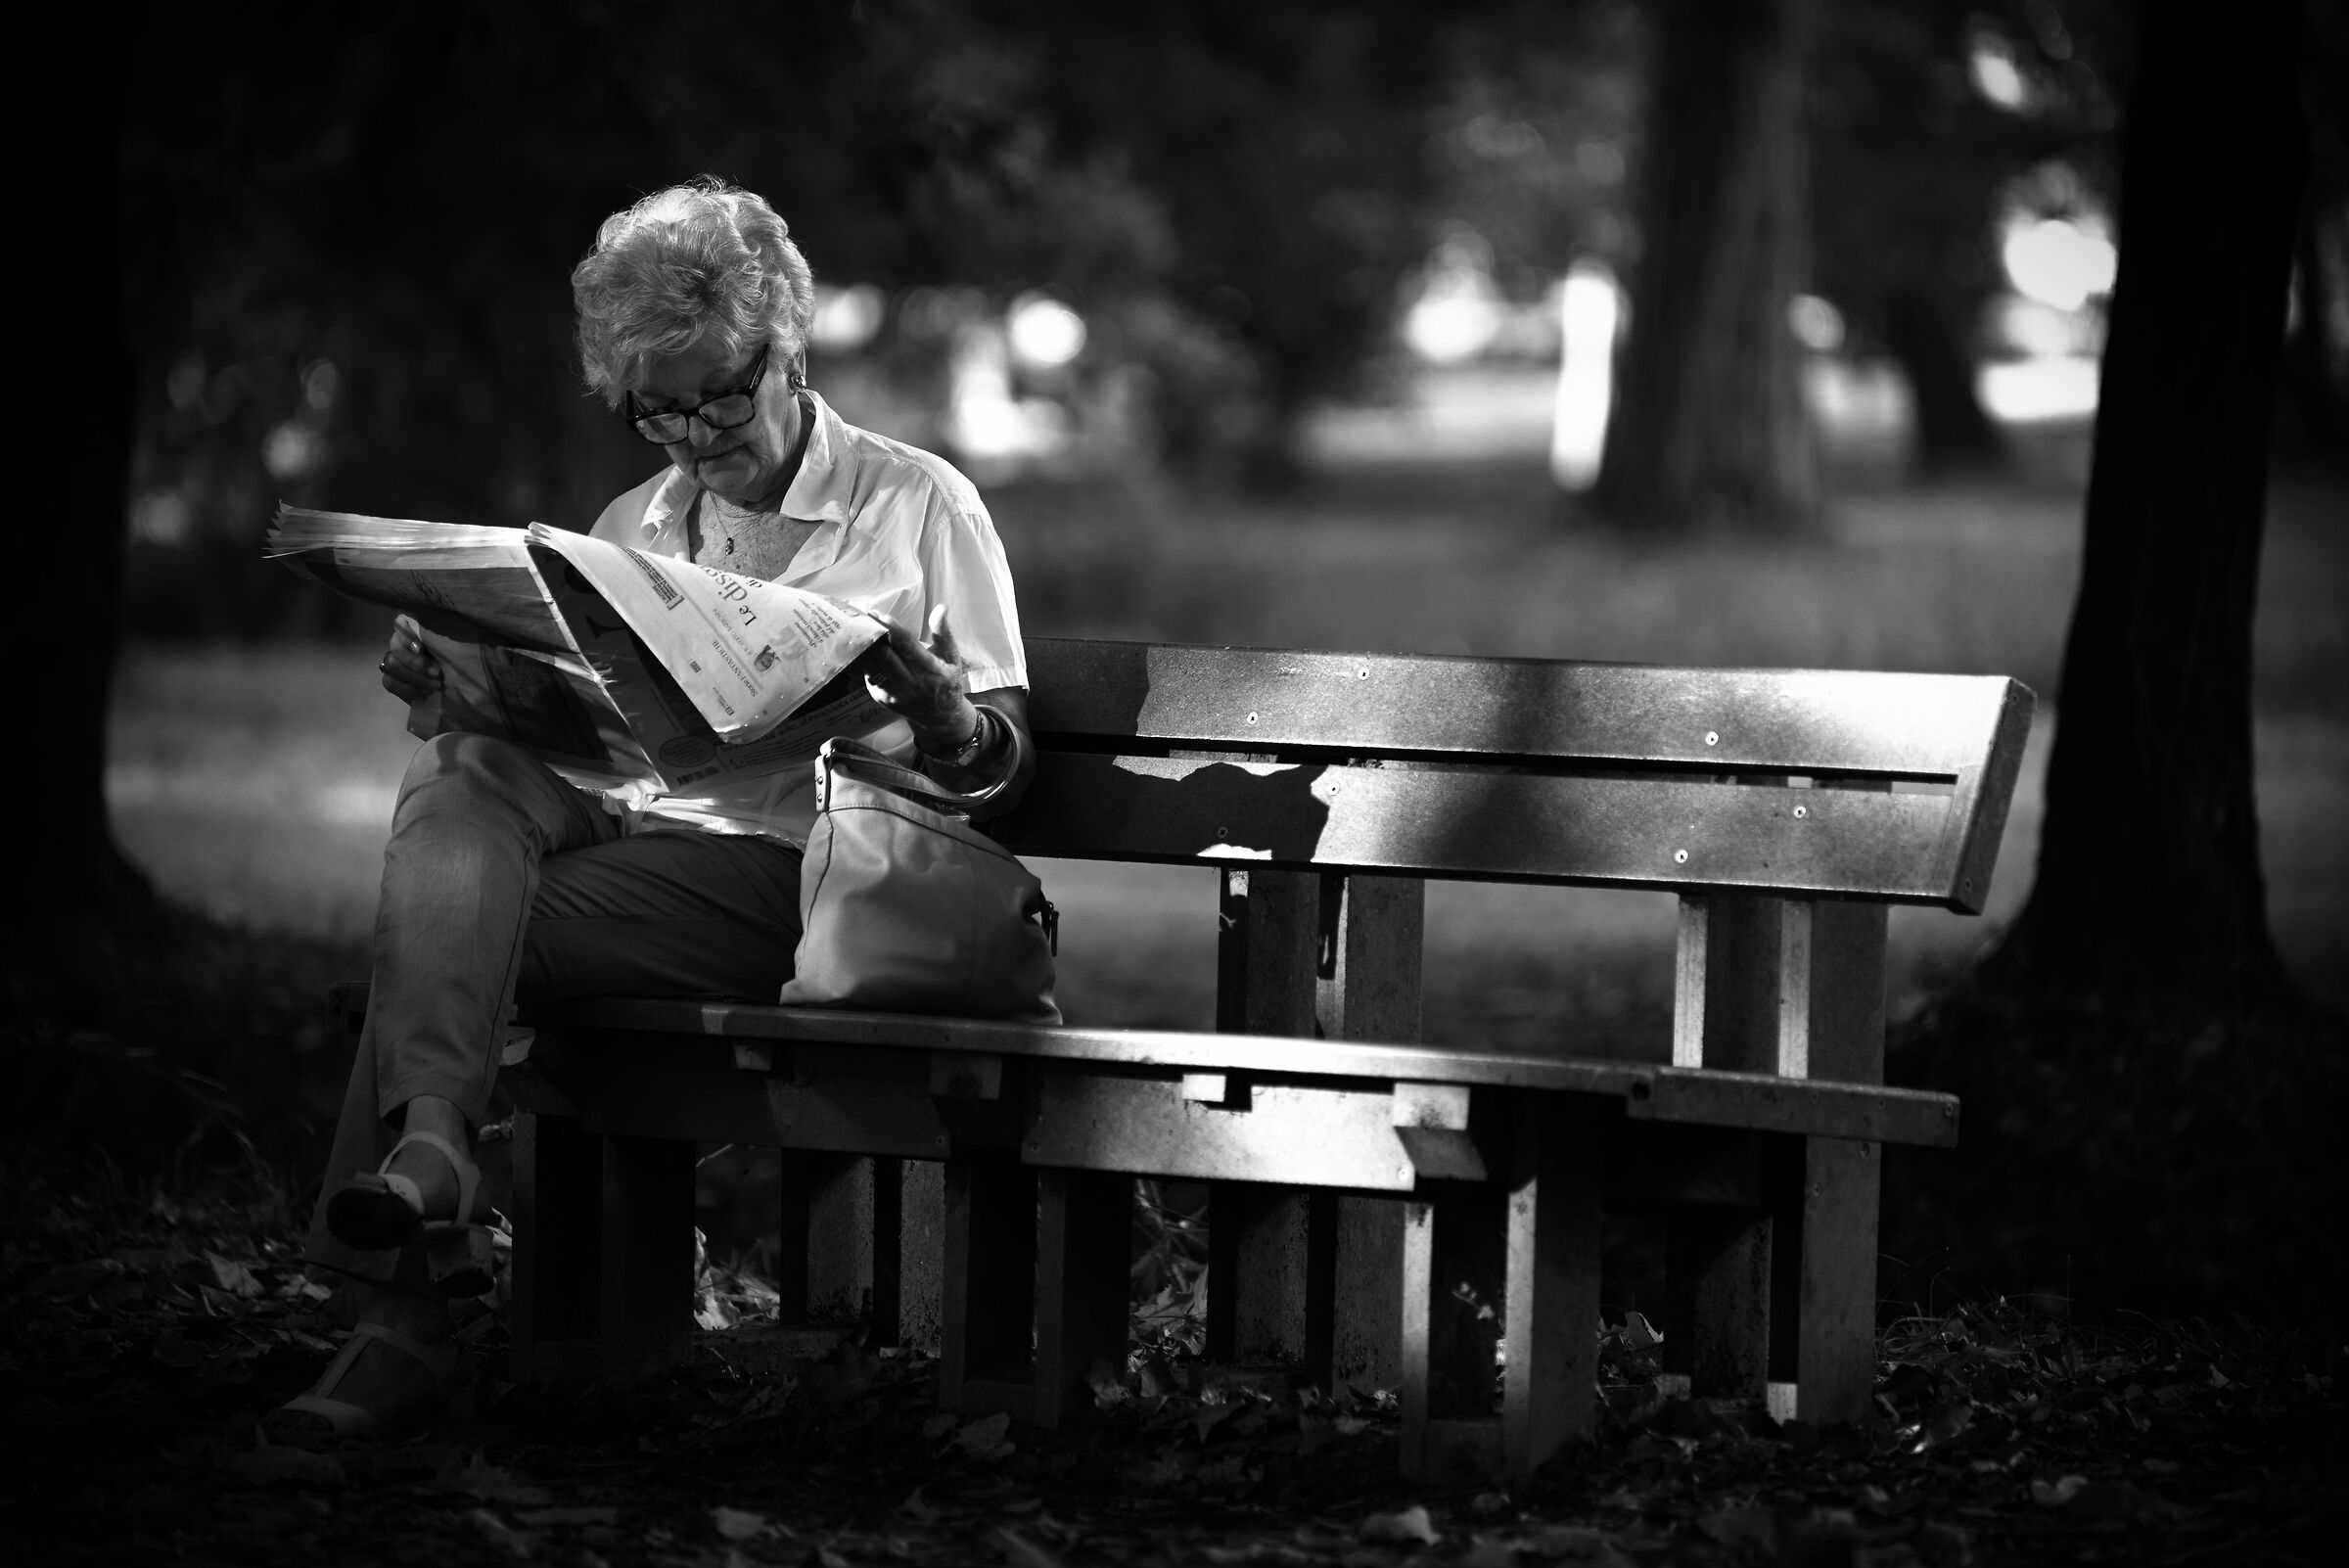 A grandni who reads the newspaper on the bench...